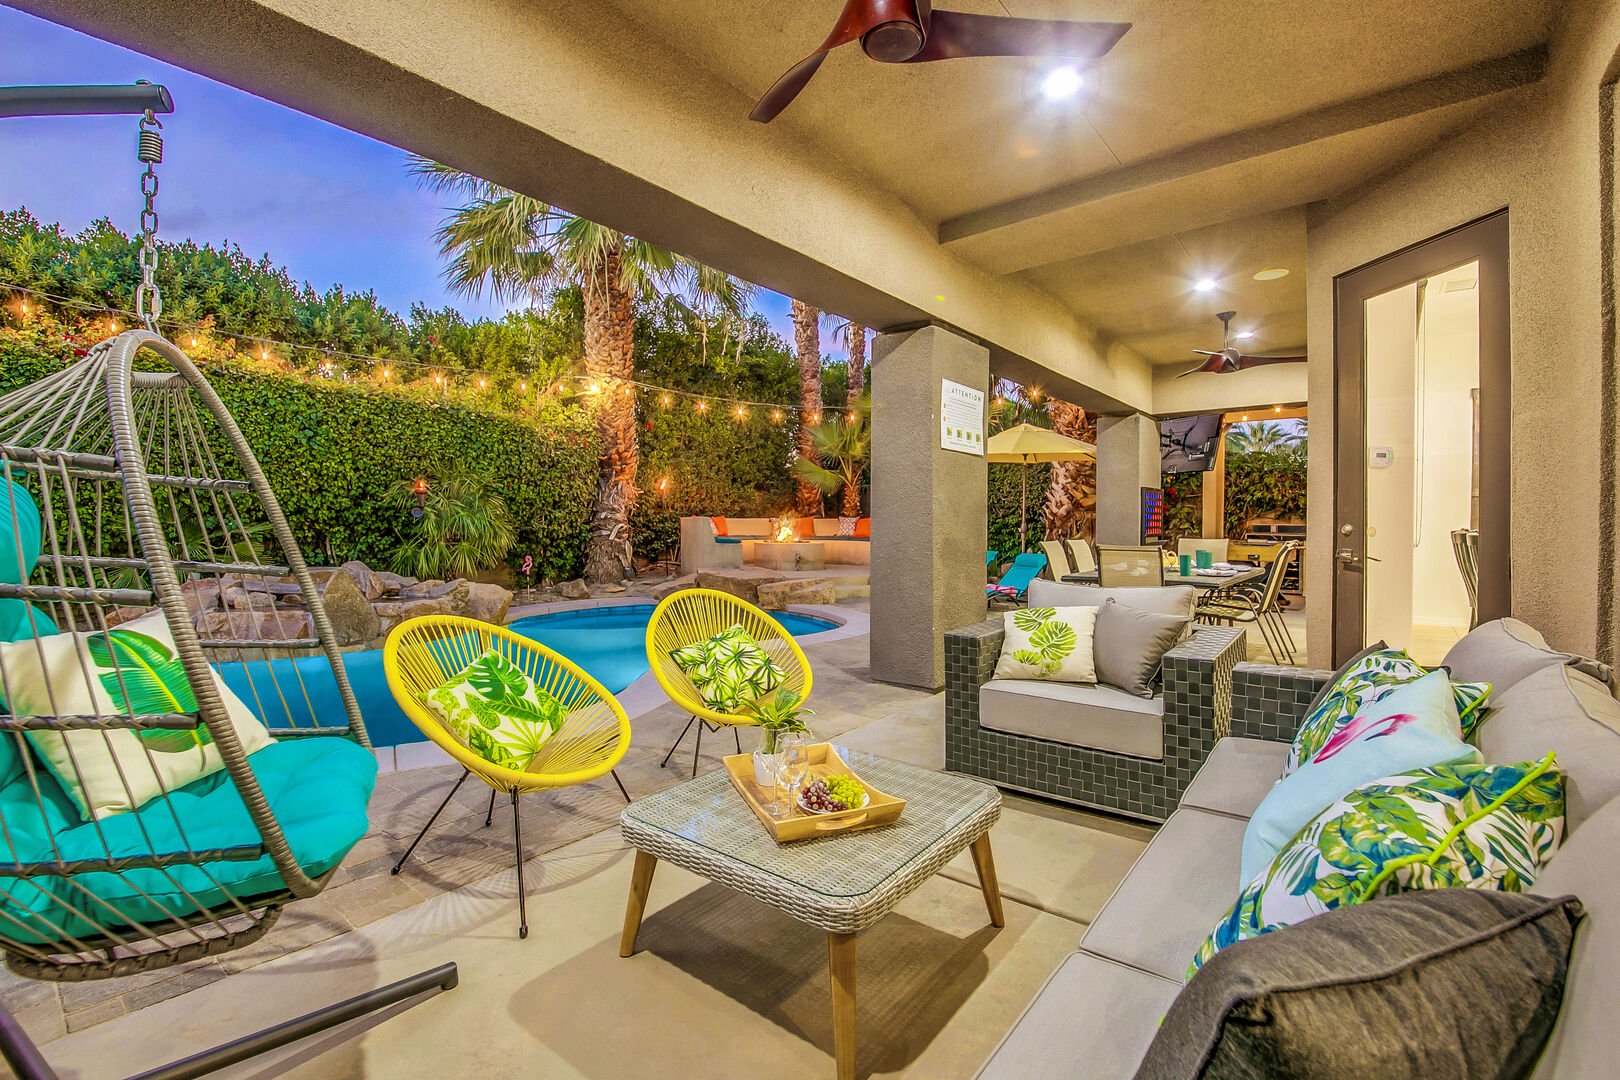 Lounge out and enjoy the view on comfortable patio furniture with seating for seven.